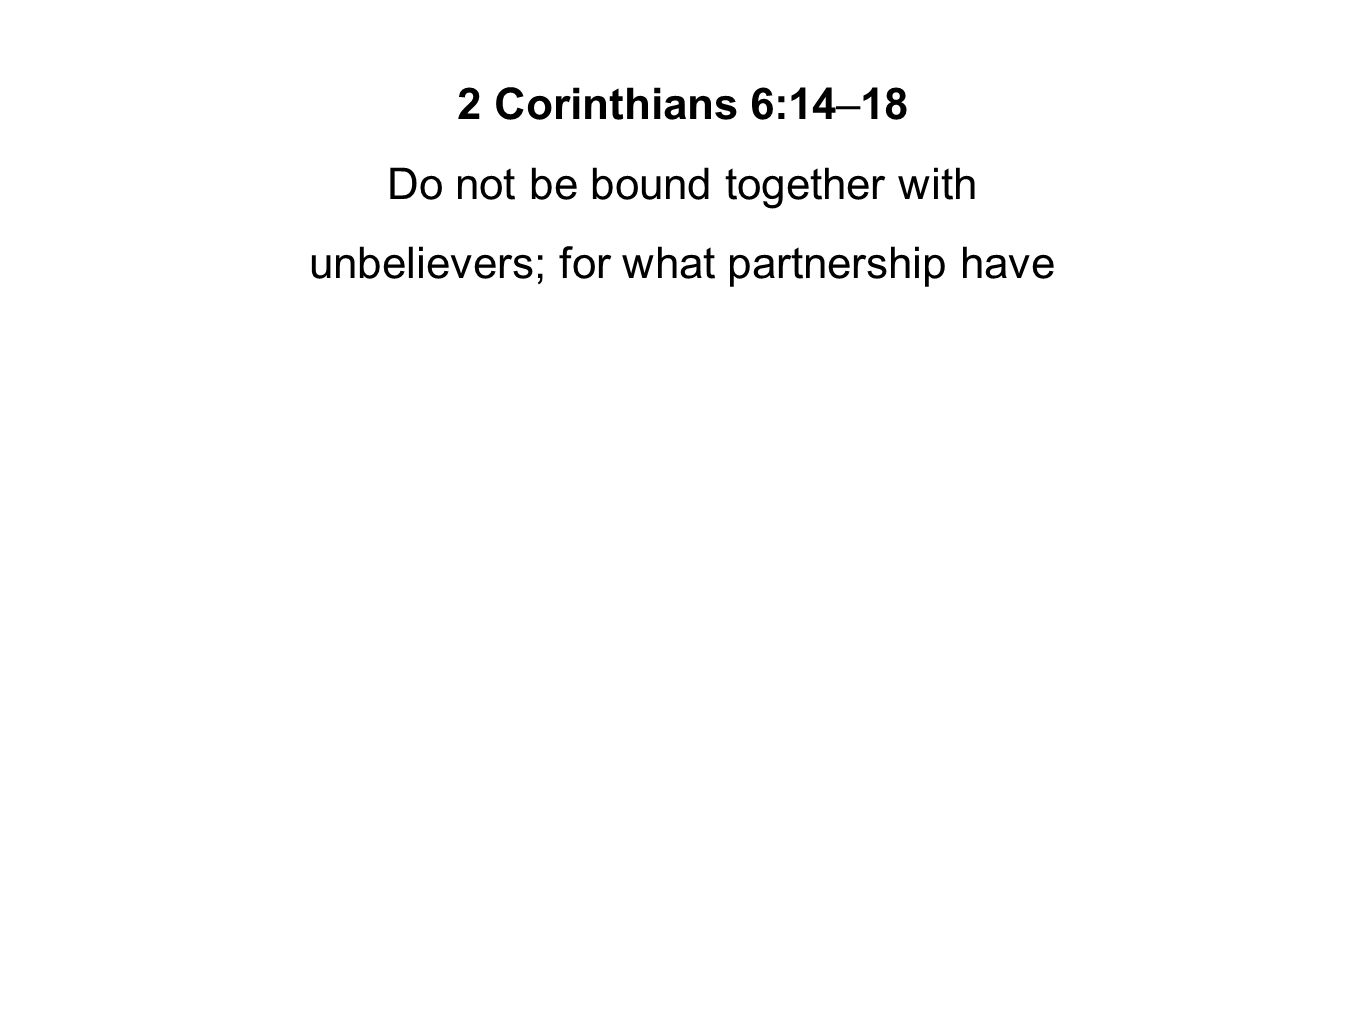 2 Corinthians 6:14–18 Do not be bound together with unbelievers; for what partnership have